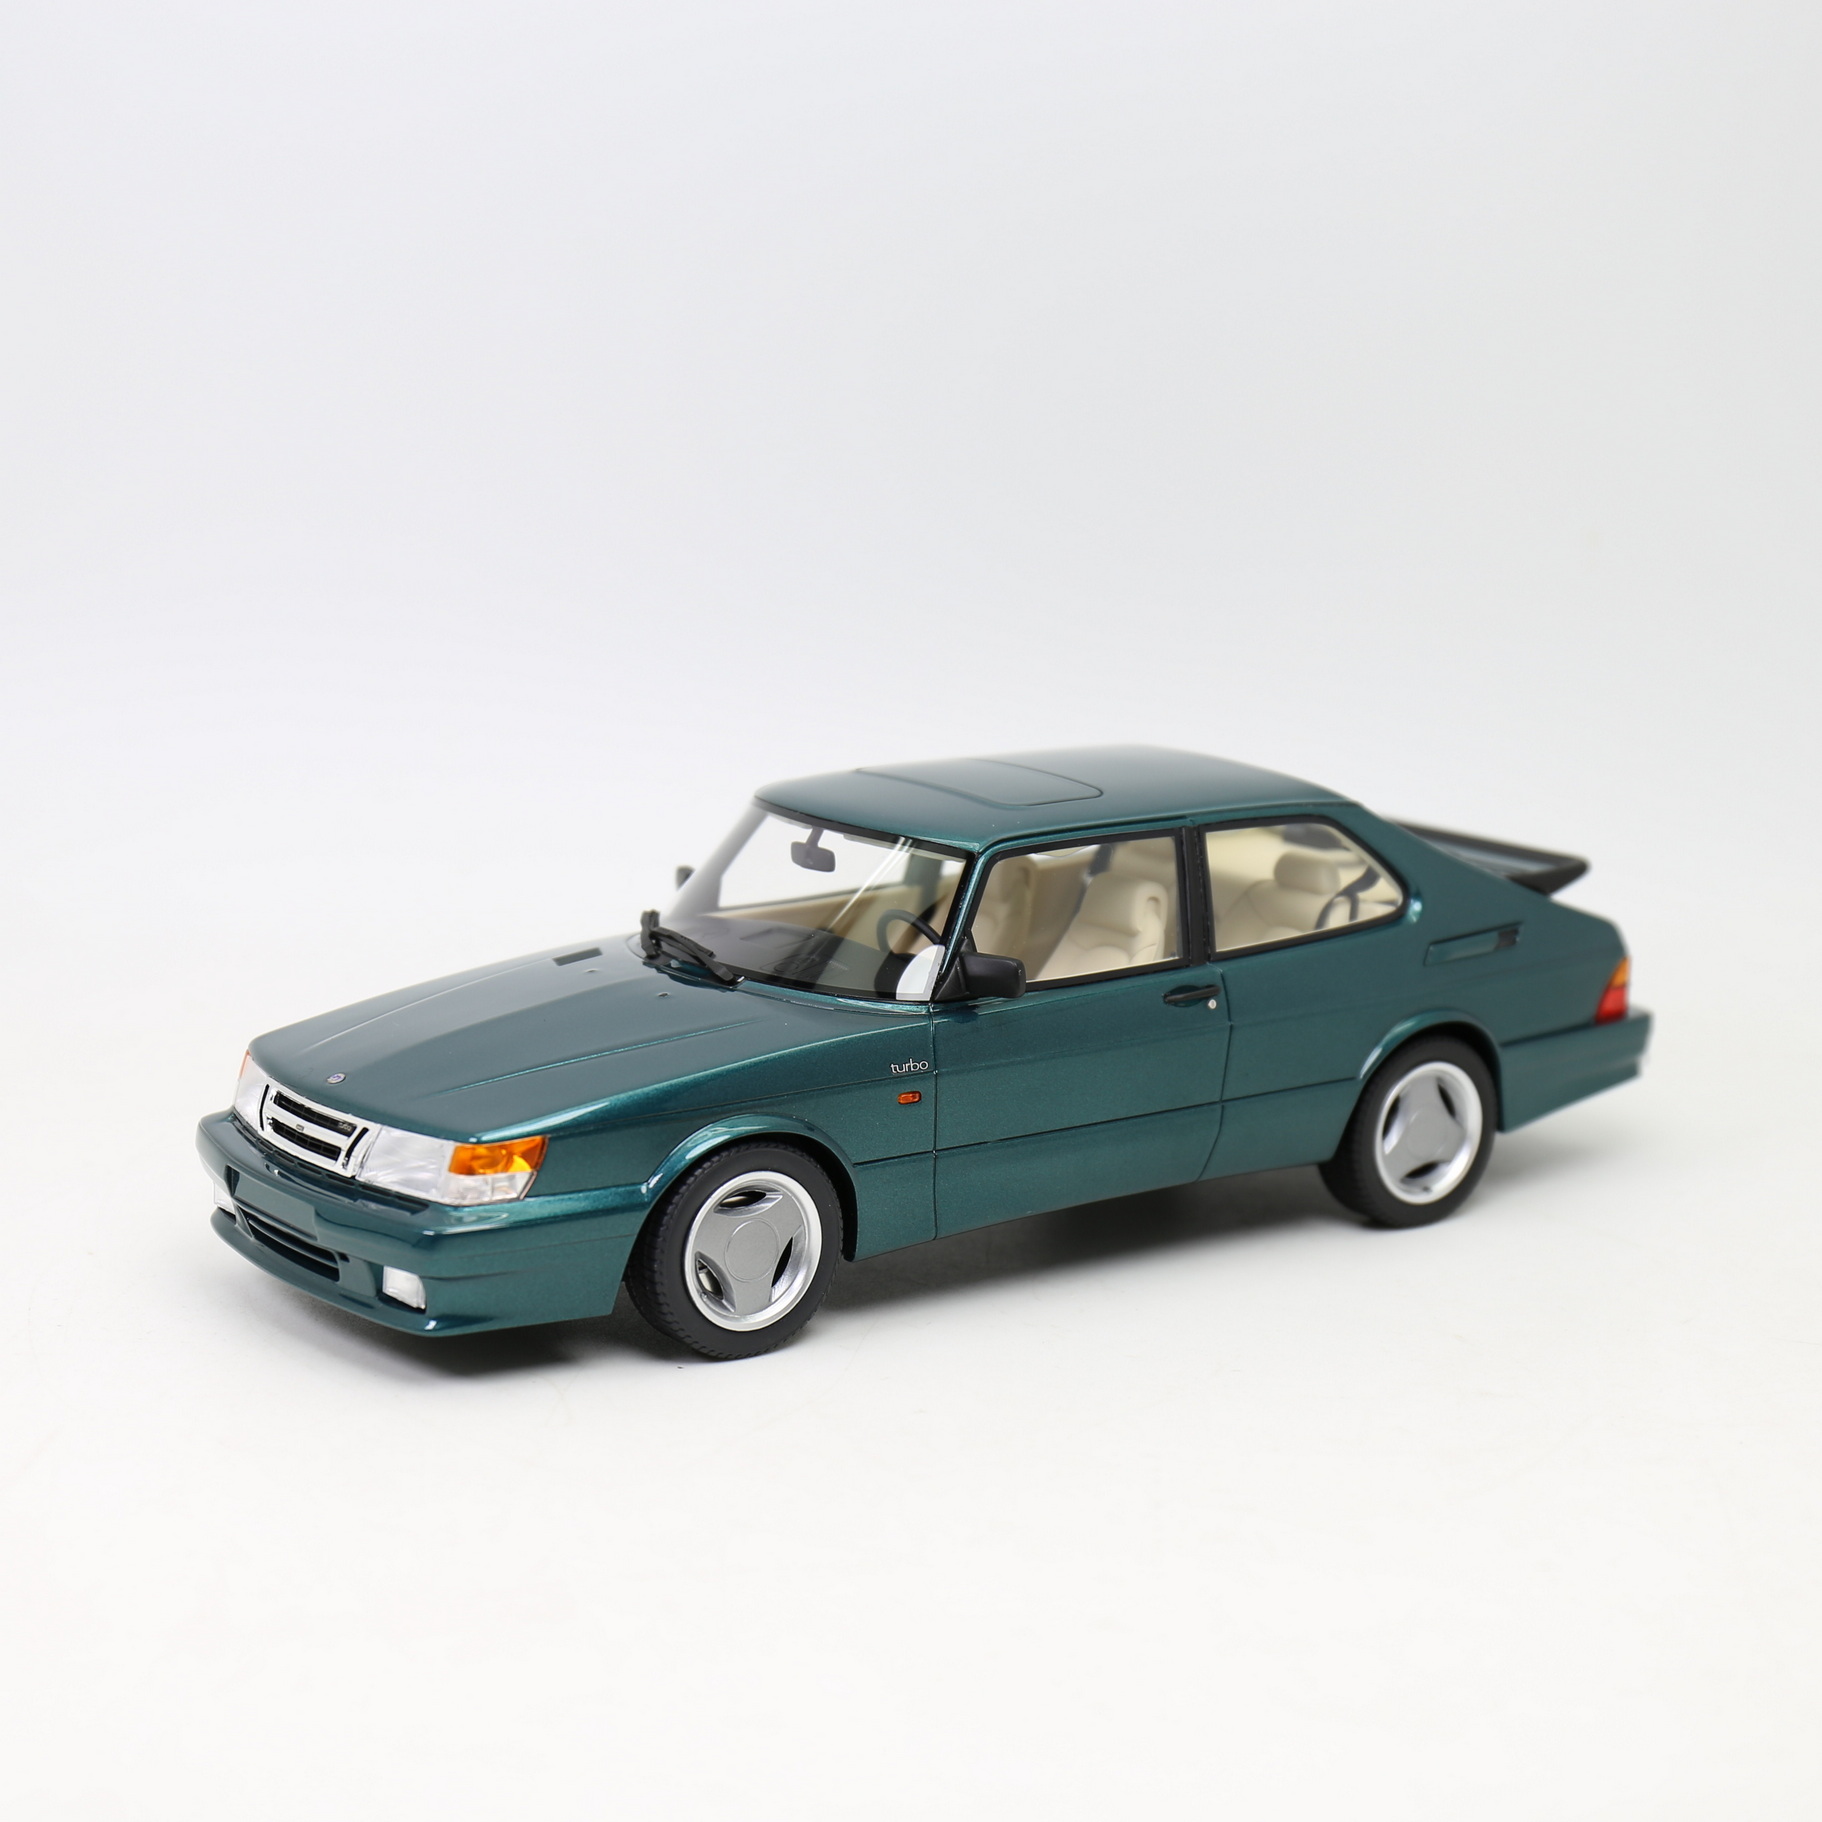 

NEW 1/18 SAAB 900 Turbo T16 Airflow Resin Model Car DNA Collectibles High quality hobbies cars by collection 1